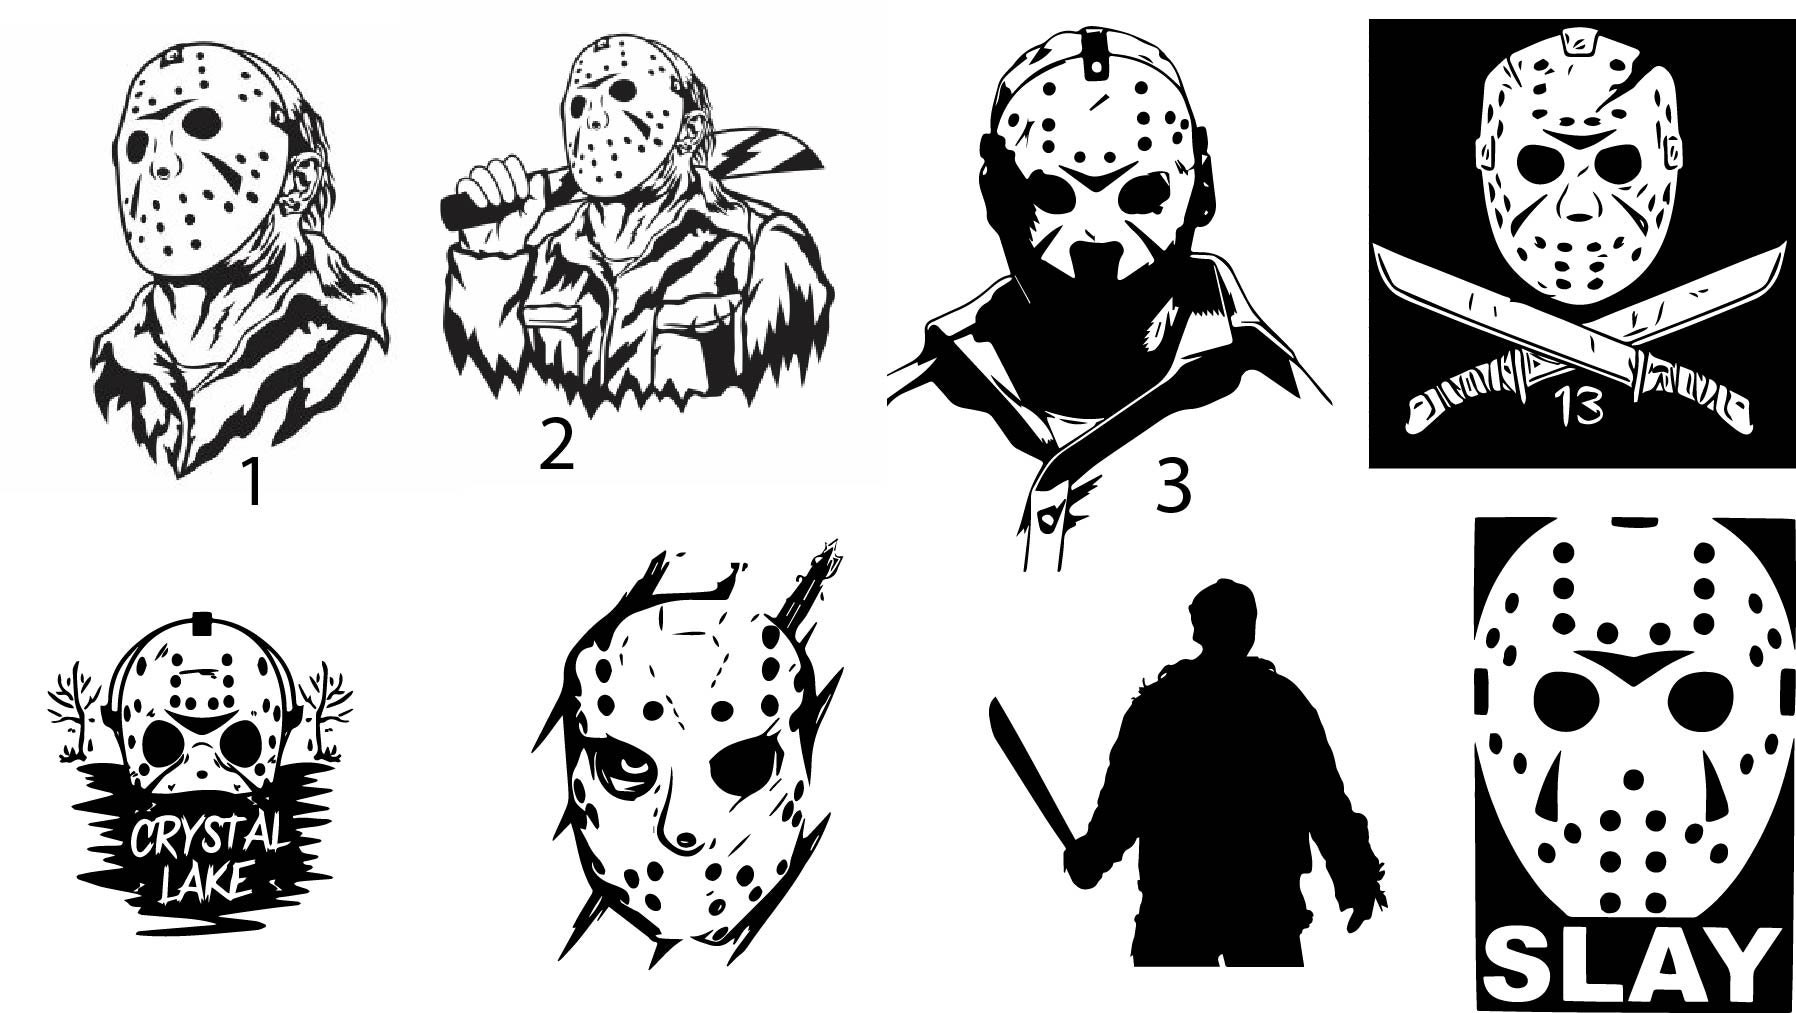 Jason Vorhees Friday the 13th Vinyl Window Cling Decal NEW